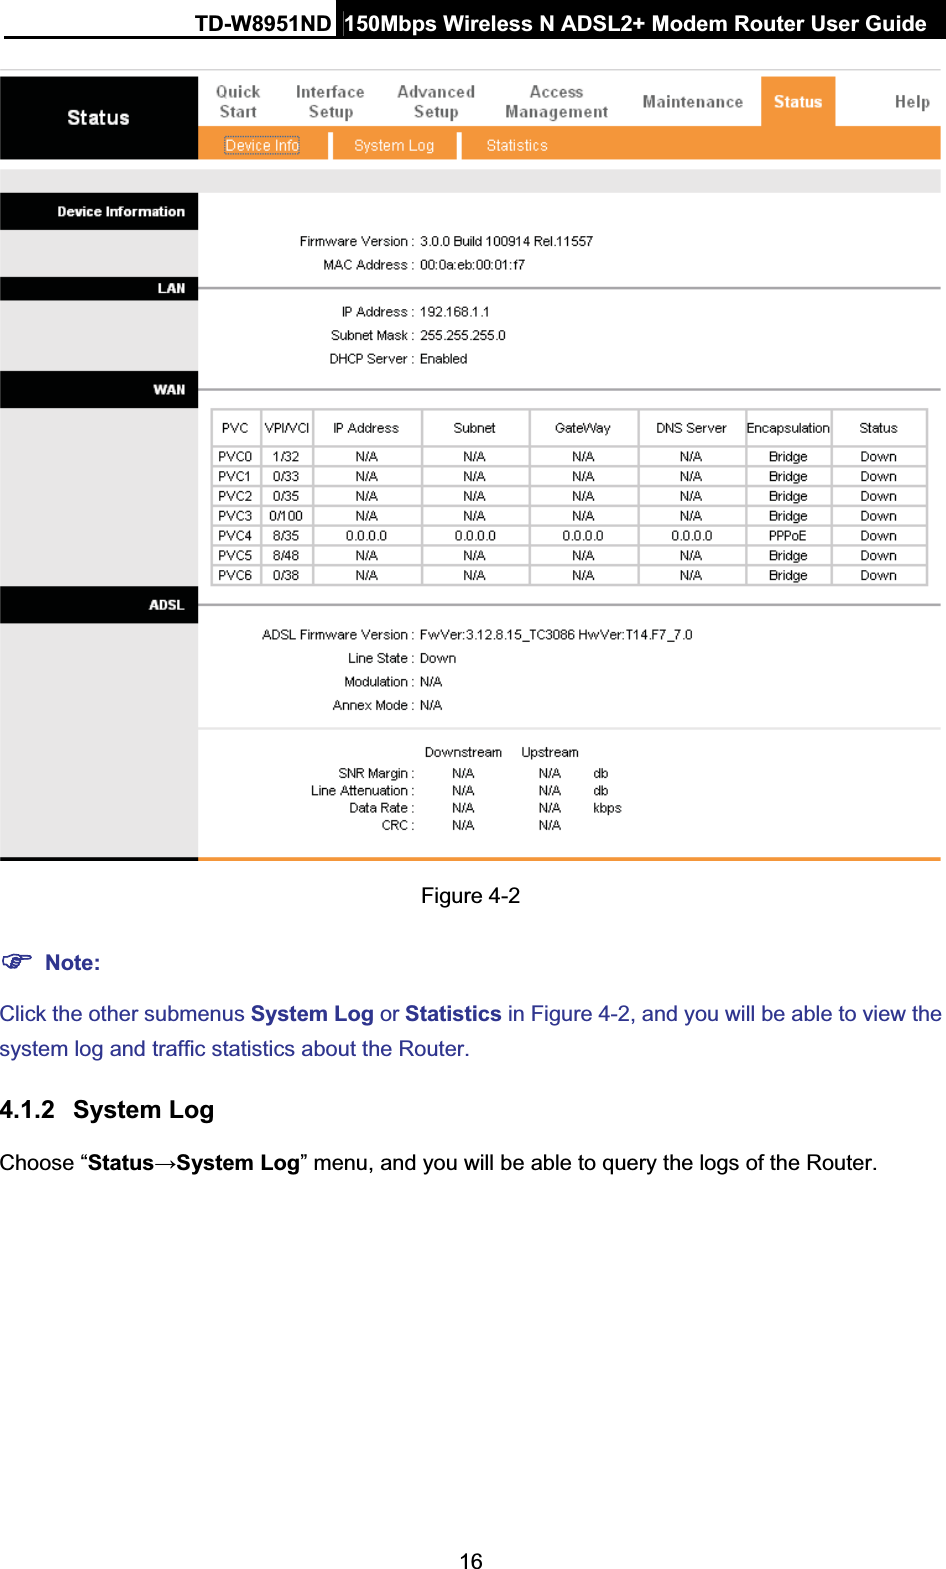 TD-W8951ND  150Mbps Wireless N ADSL2+ Modem Router User Guide16Figure 4-2 )Note:Click the other submenus System Log or Statistics in Figure 4-2, and you will be able to view the system log and traffic statistics about the Router. 4.1.2 System Log Choose “StatusĺSystem Log” menu, and you will be able to query the logs of the Router. 